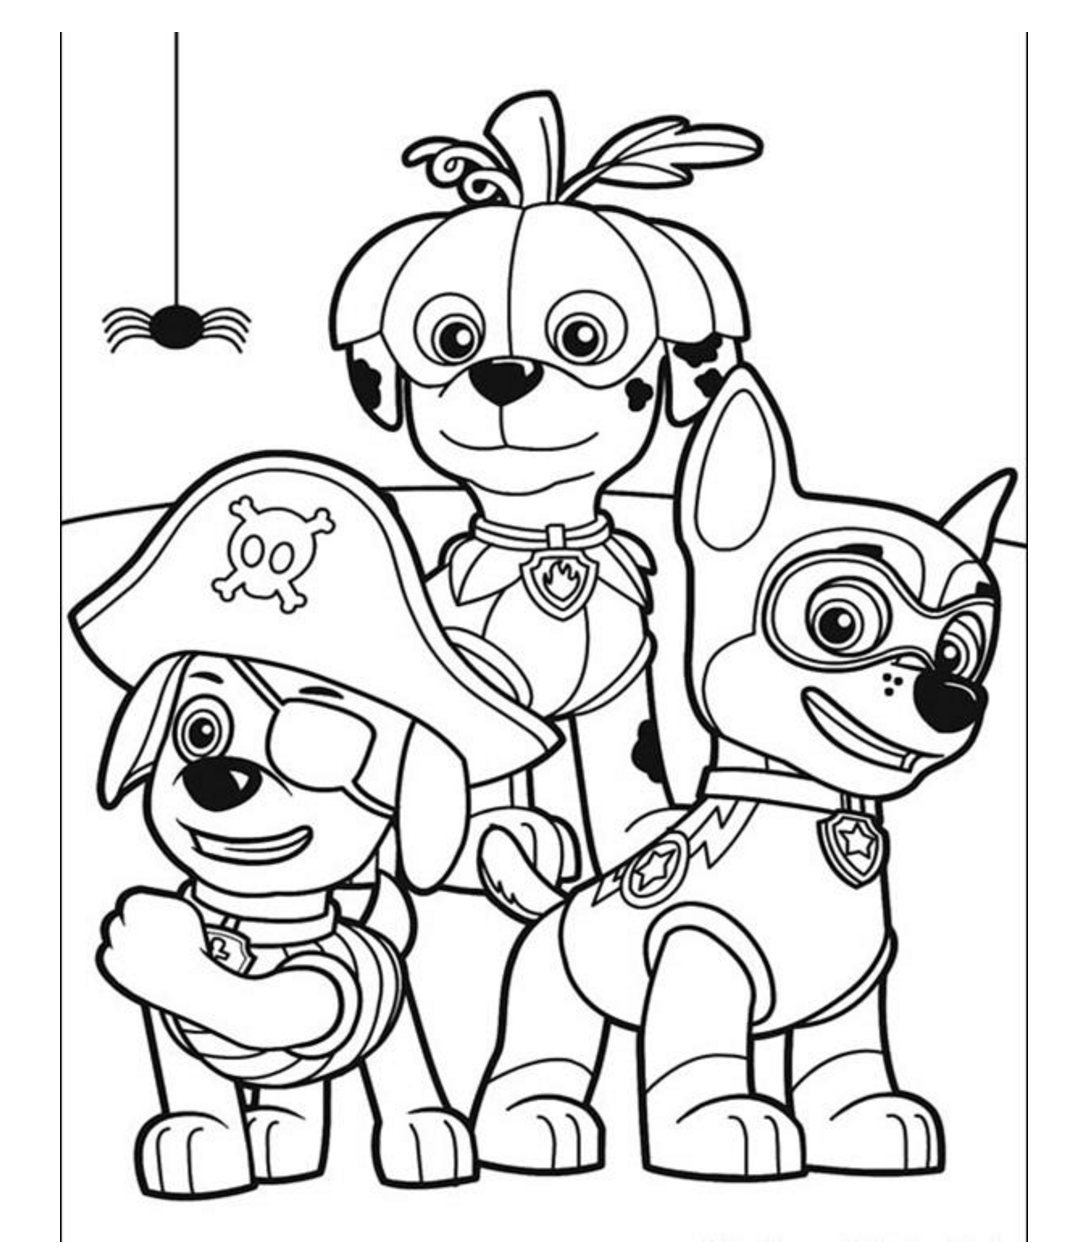 PAW Patrol on Halloween Coloring Pages